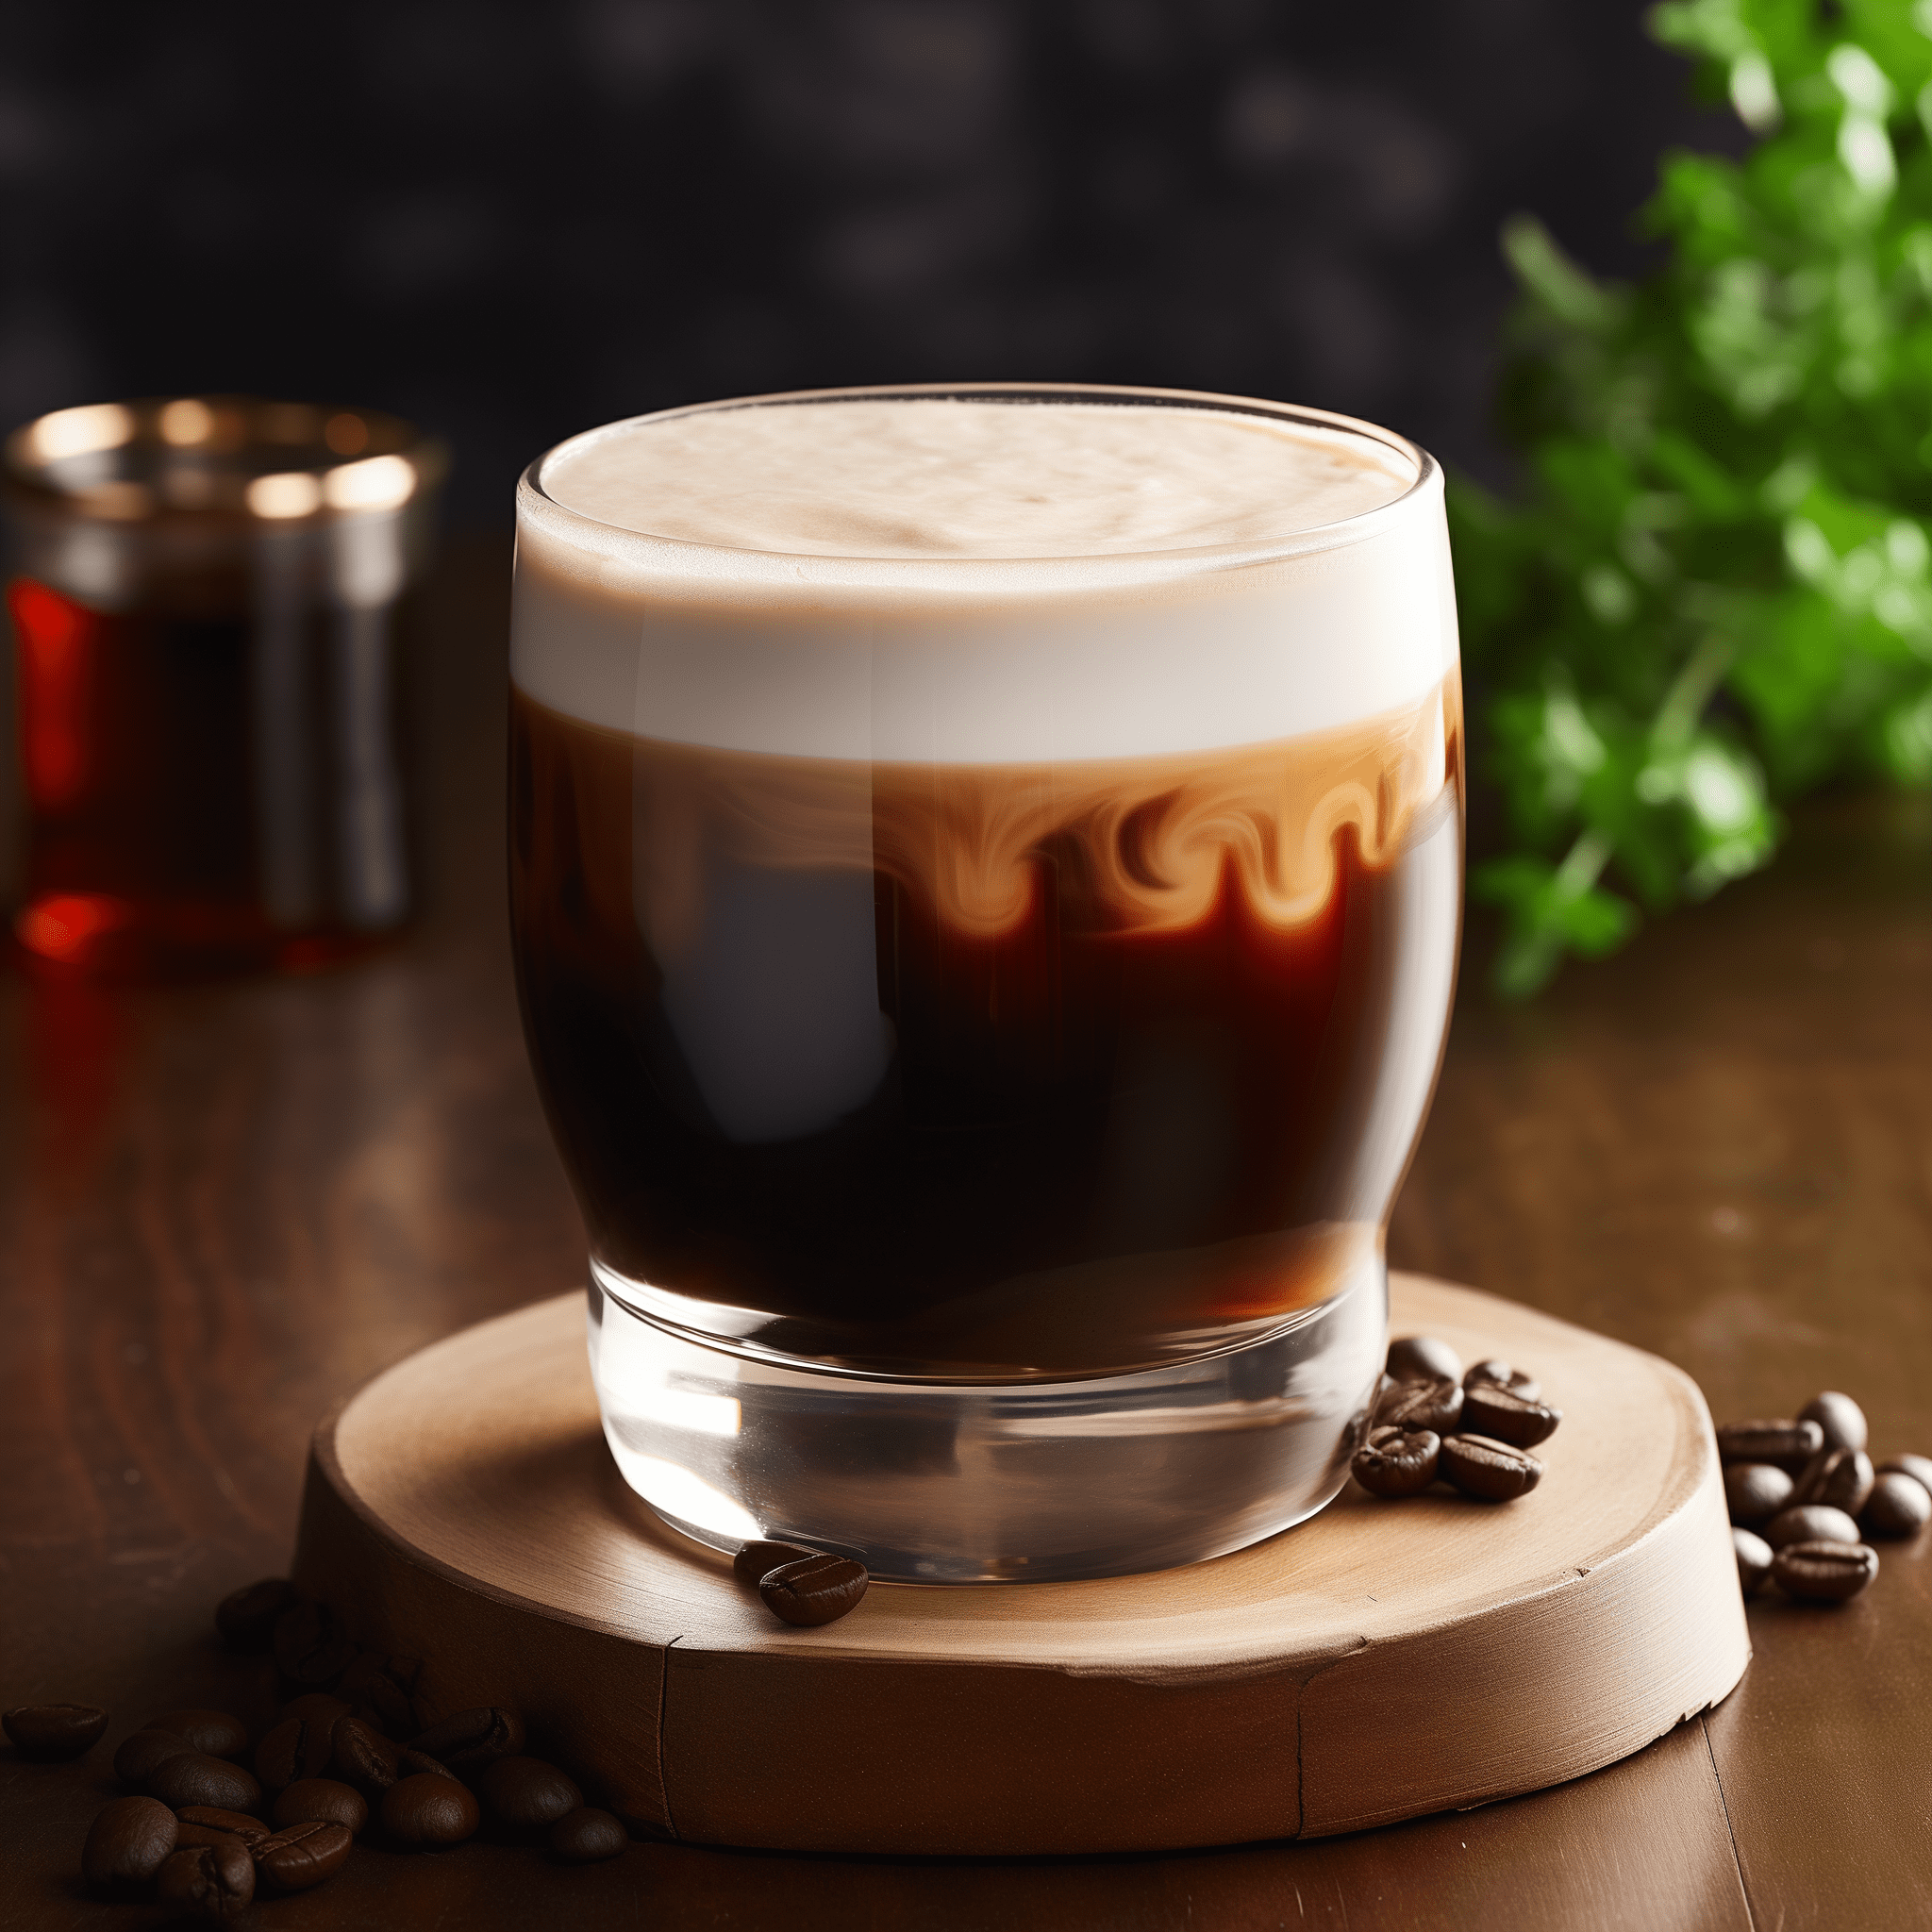 White Ukrainian Cocktail Recipe - The White Ukrainian is velvety smooth, with a rich coffee flavor that's balanced by the sweetness of the cream. It's a decadent drink with a slight vodka kick, making it both comforting and invigorating.